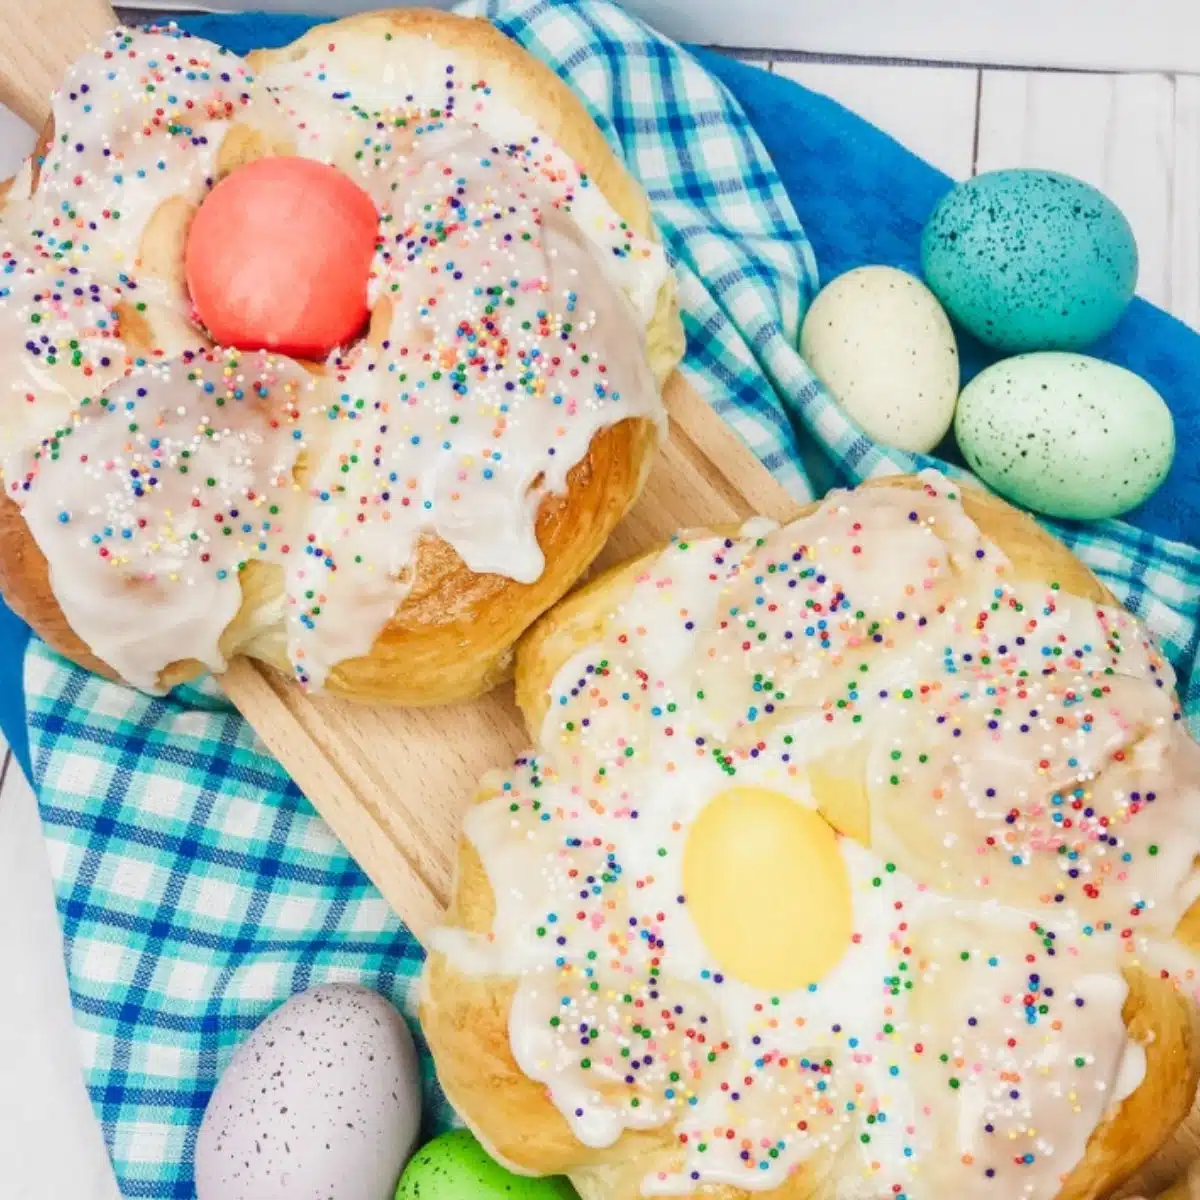 2 individual rings of Italian Easter Bread with icing and sprinkles.